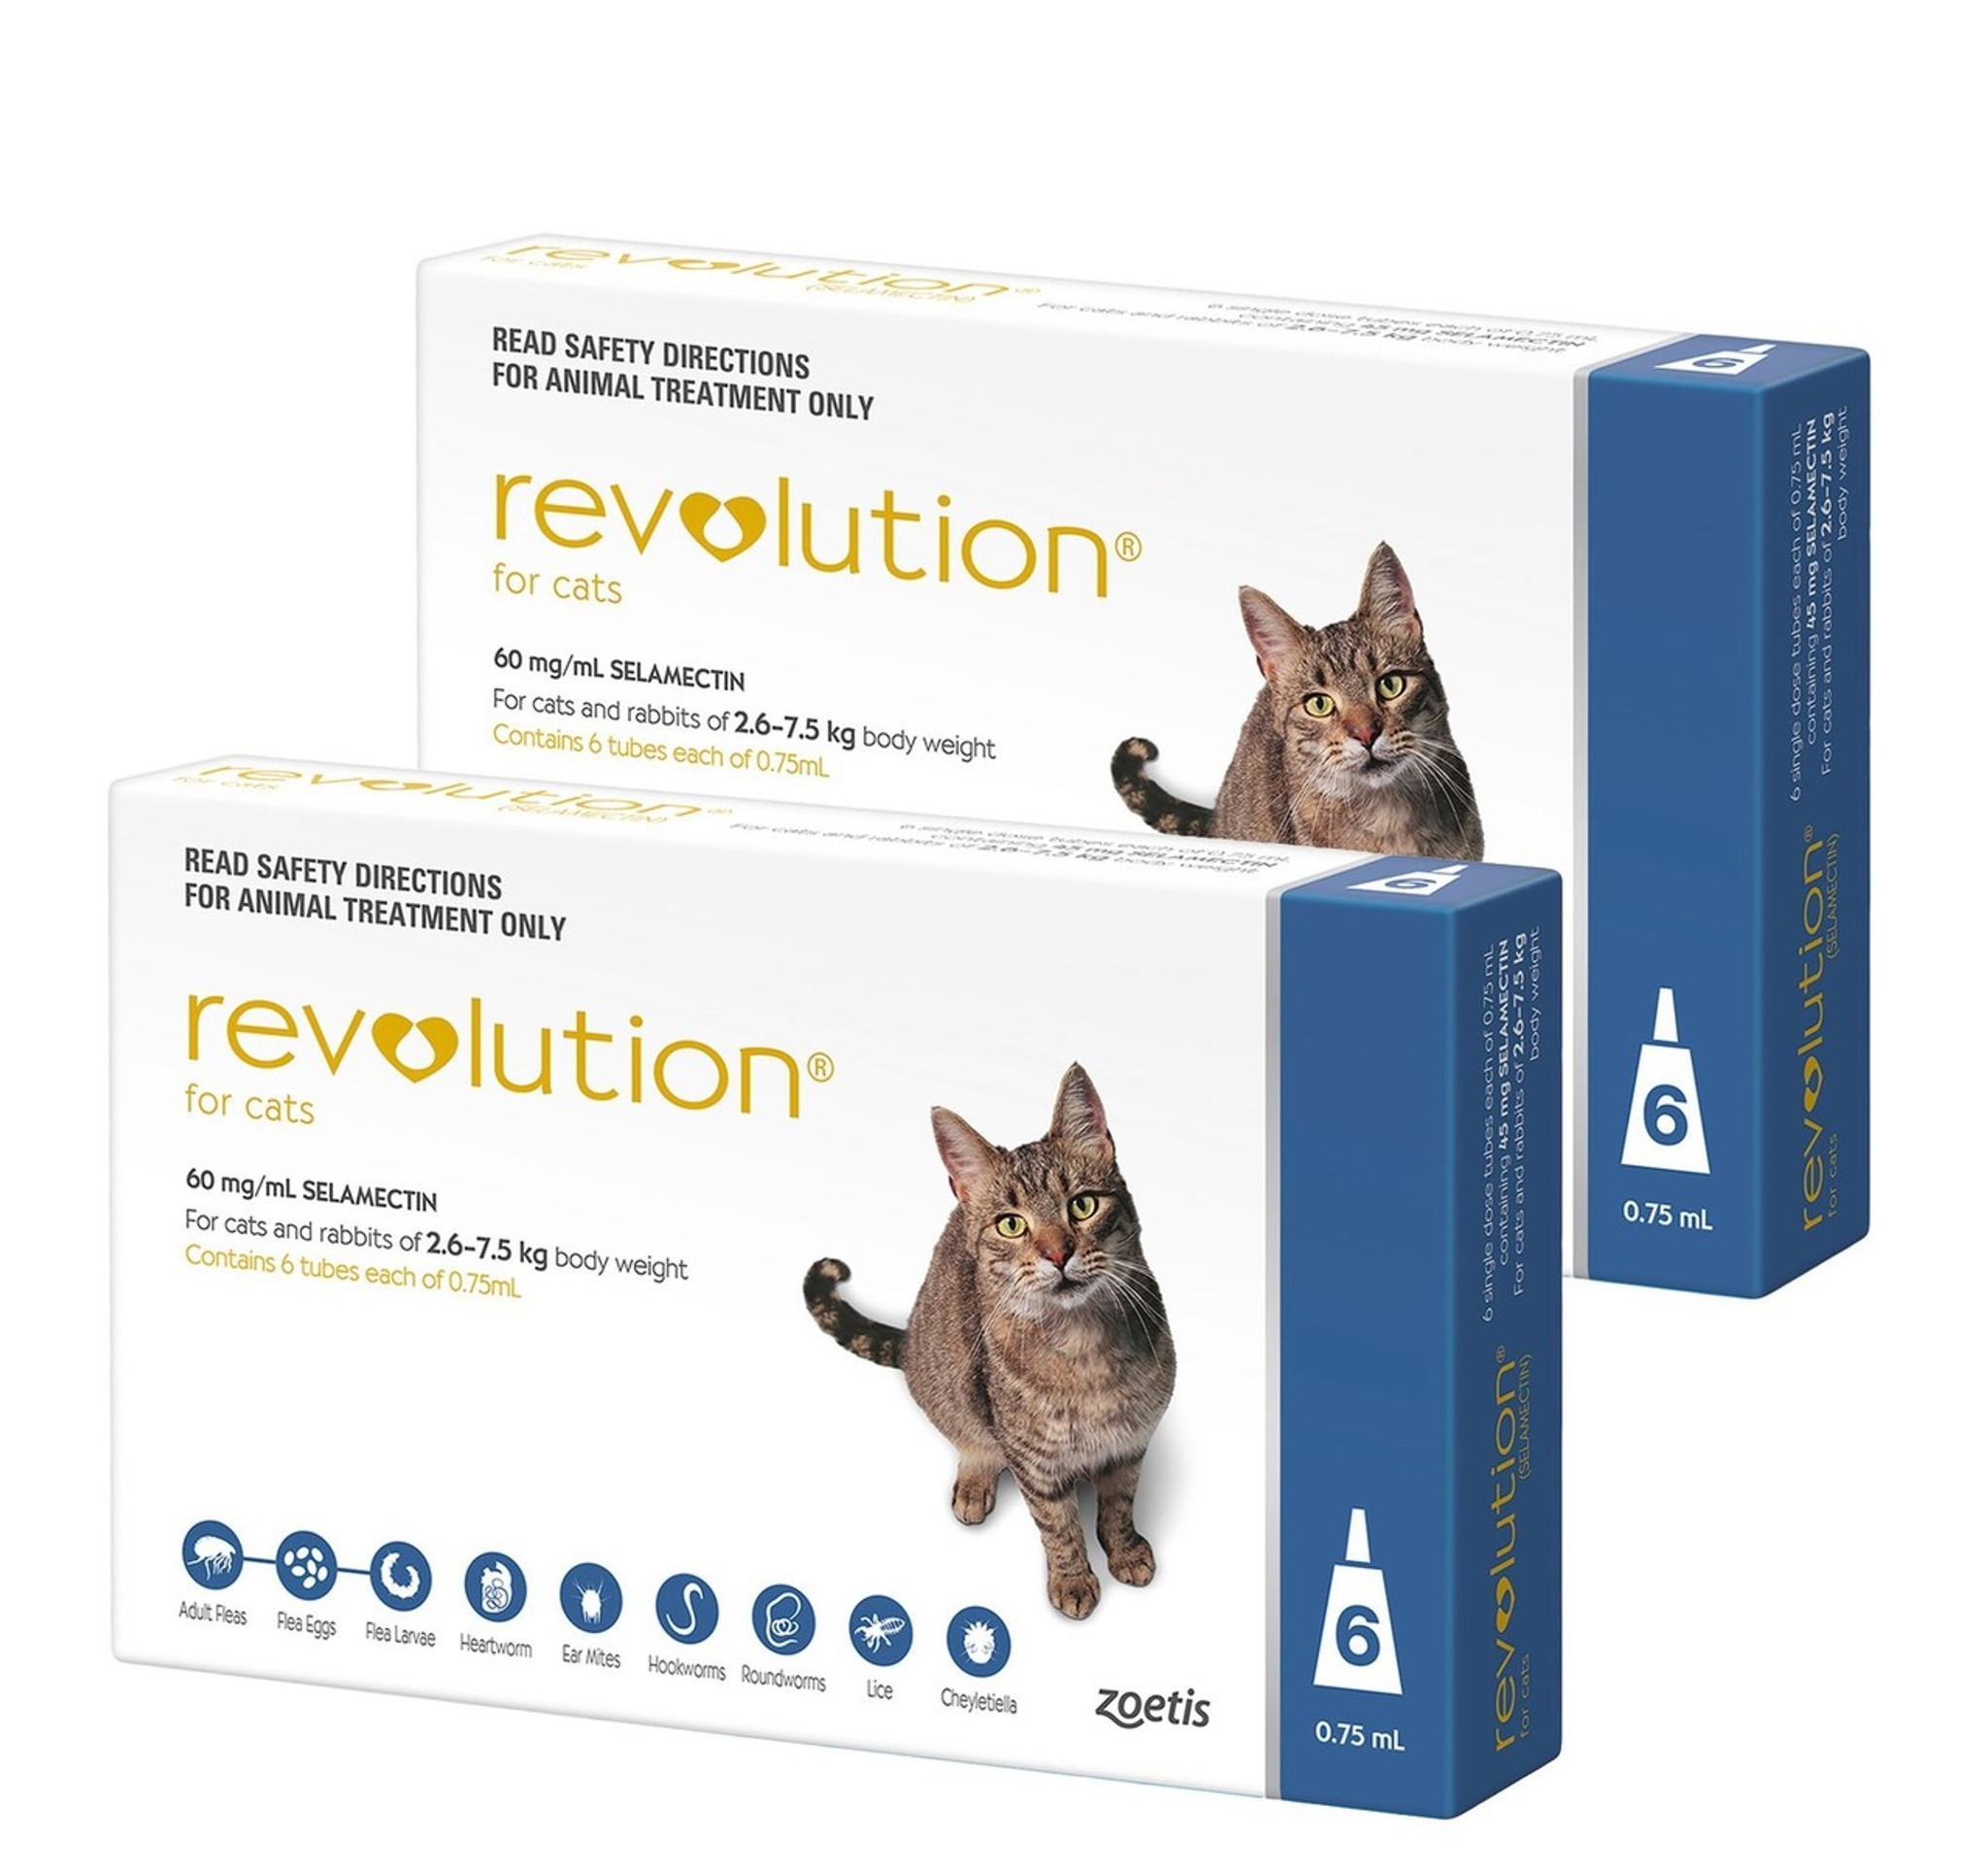 revolution-plus-topical-solution-for-cats-buy-online-at-cheapest-price